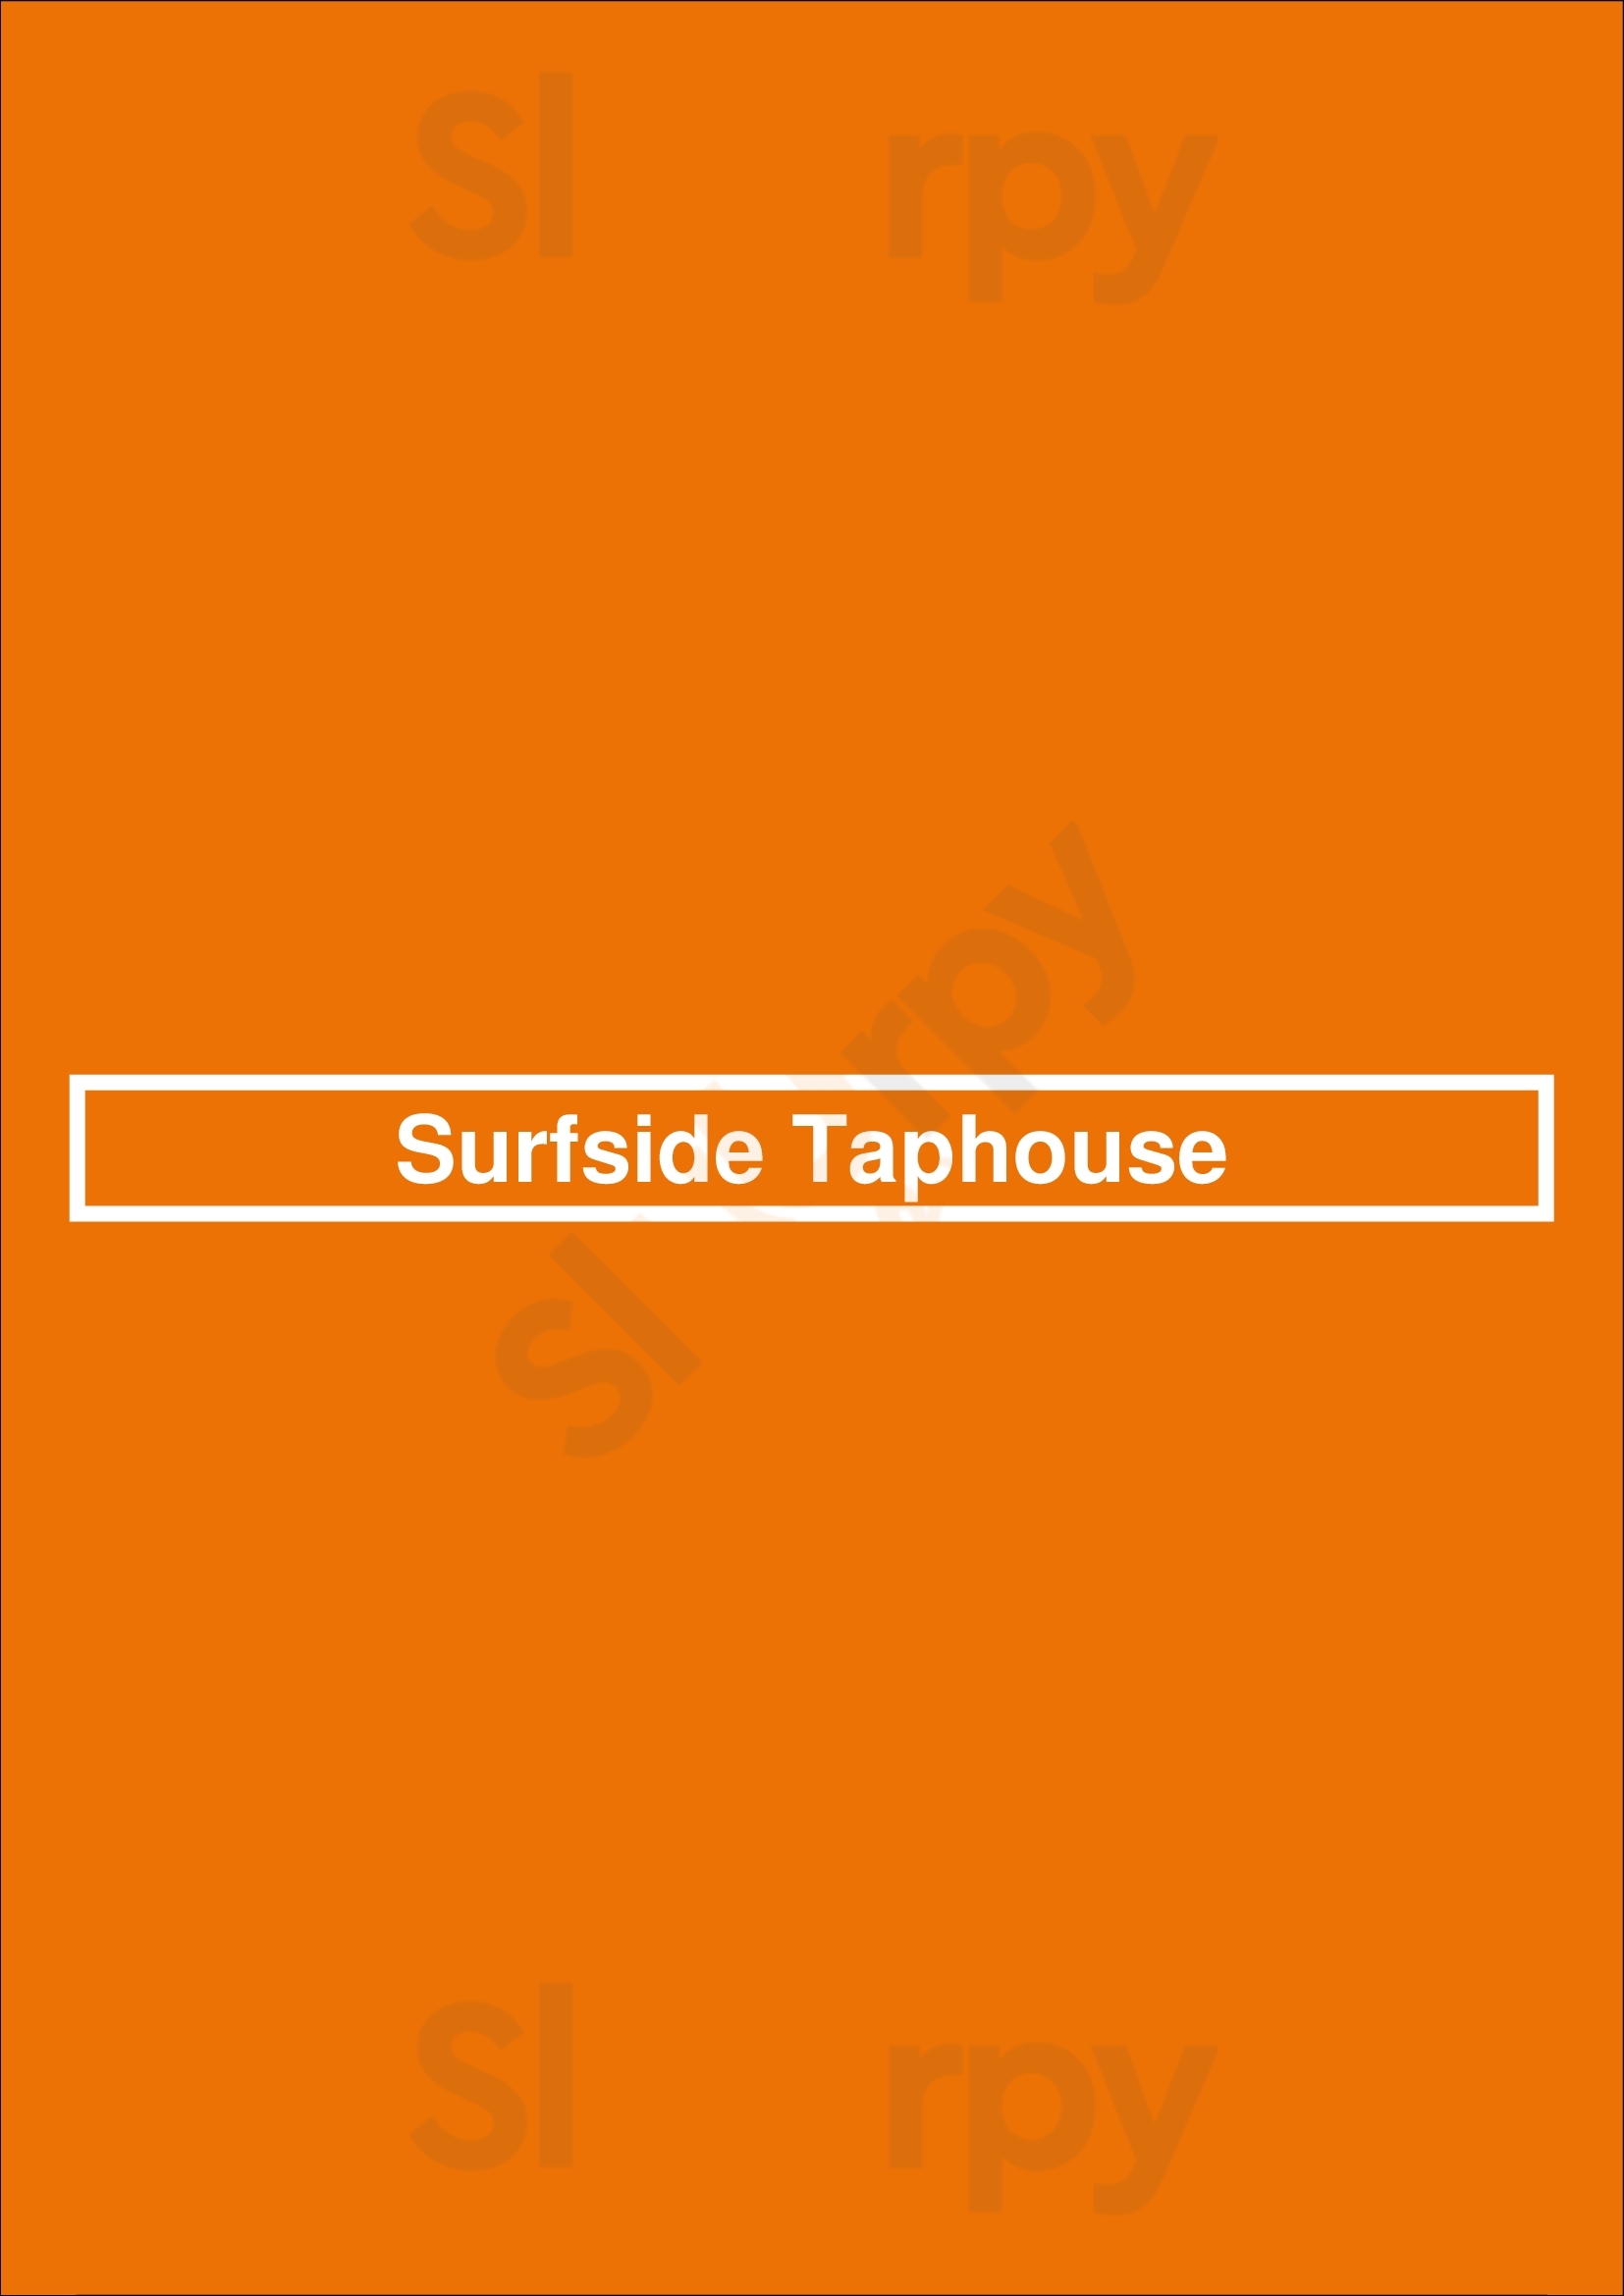 Surfside Taphouse Clearwater Menu - 1